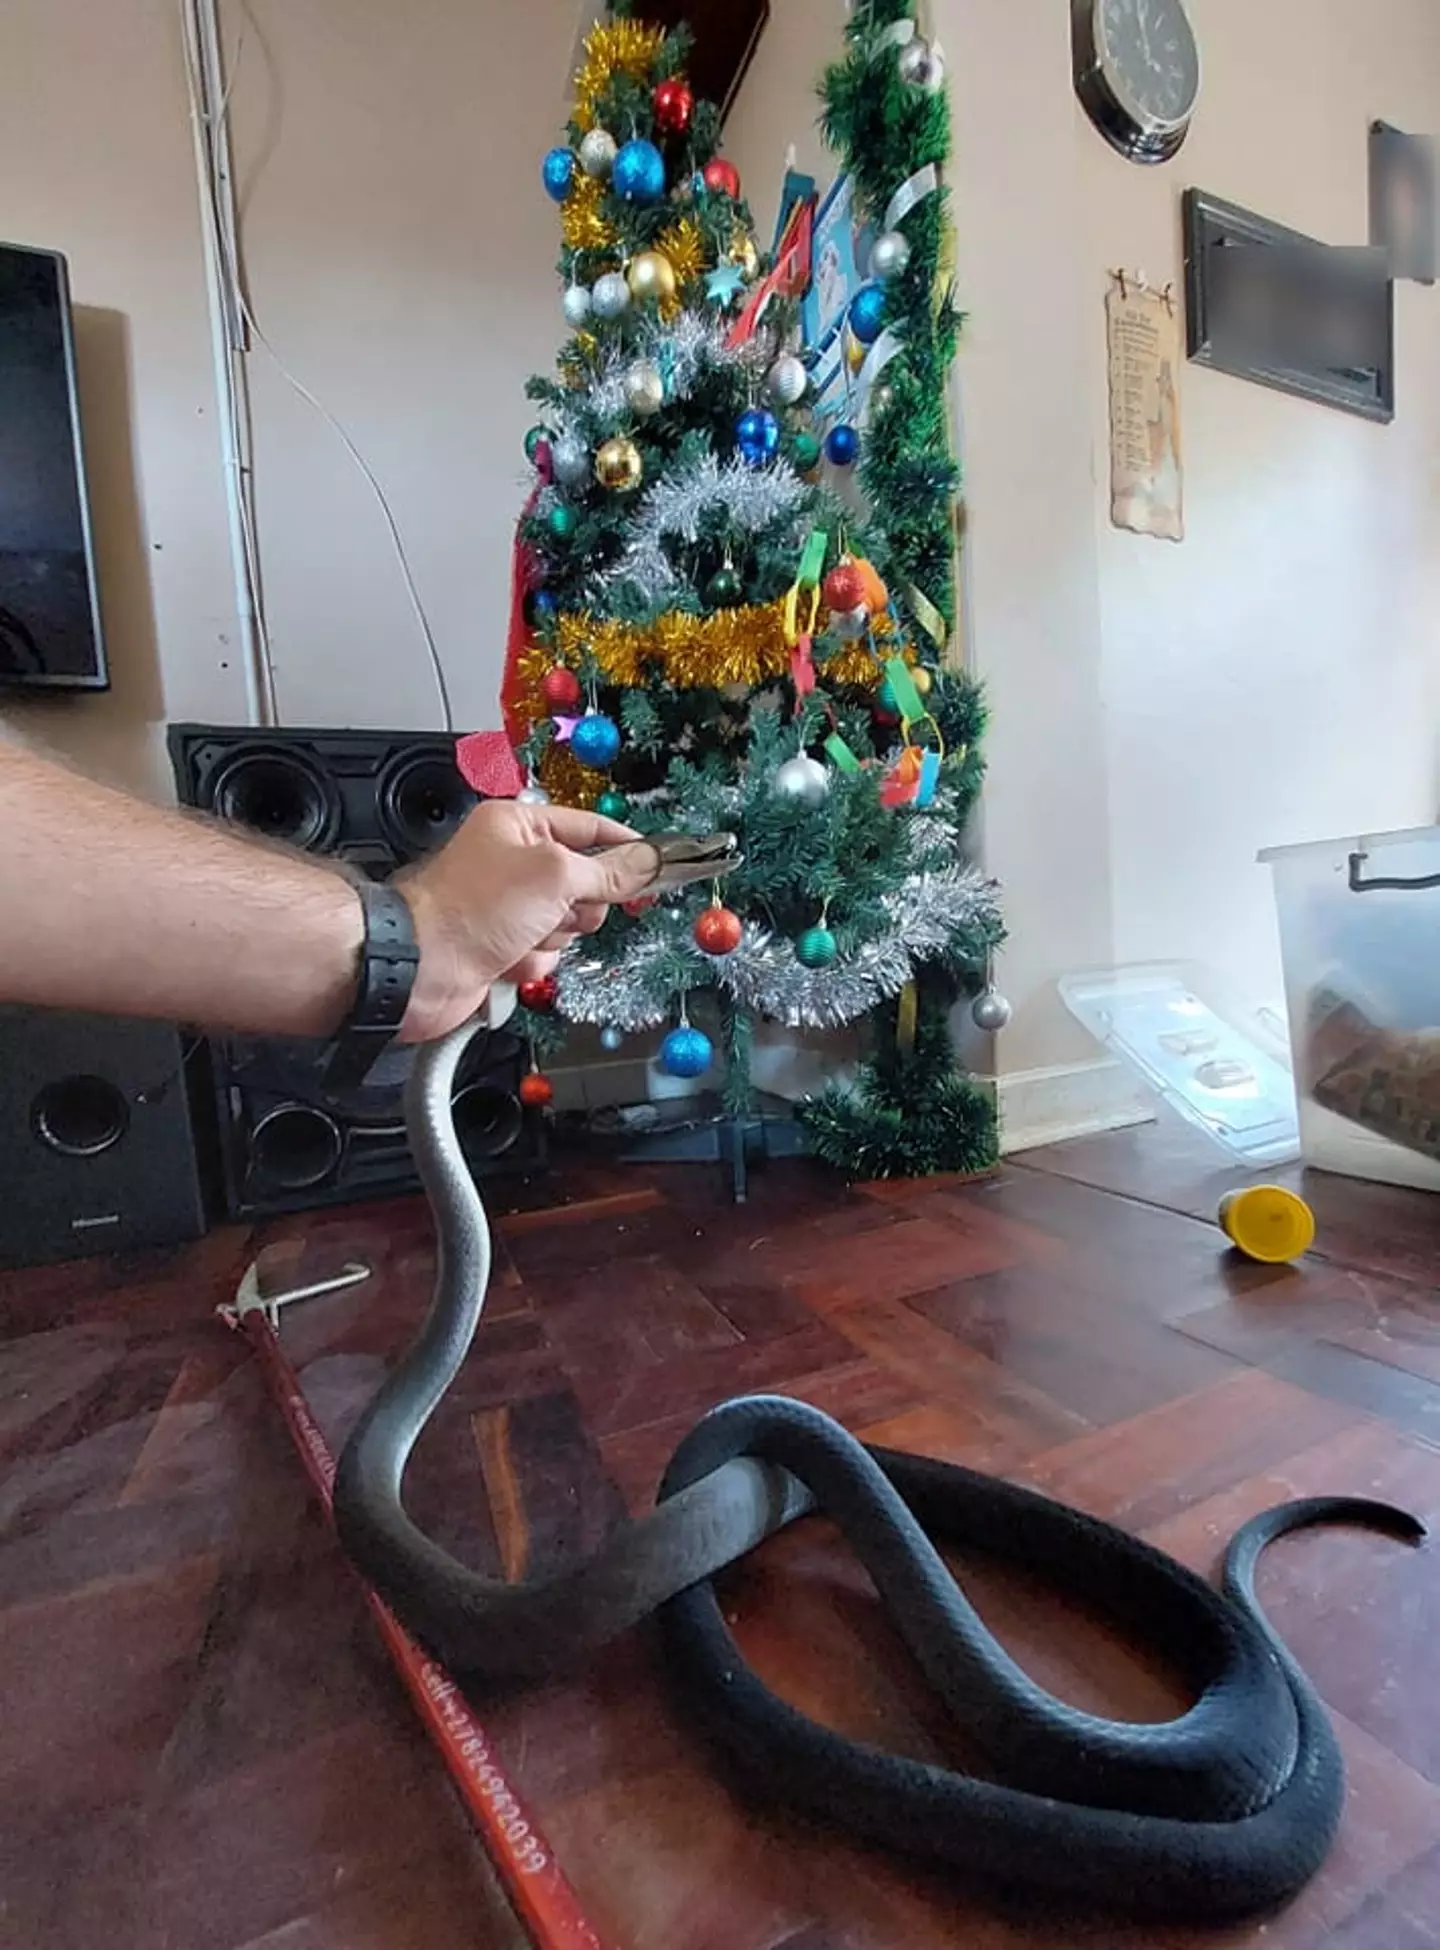 The family spotted the snake under the Christmas tree.